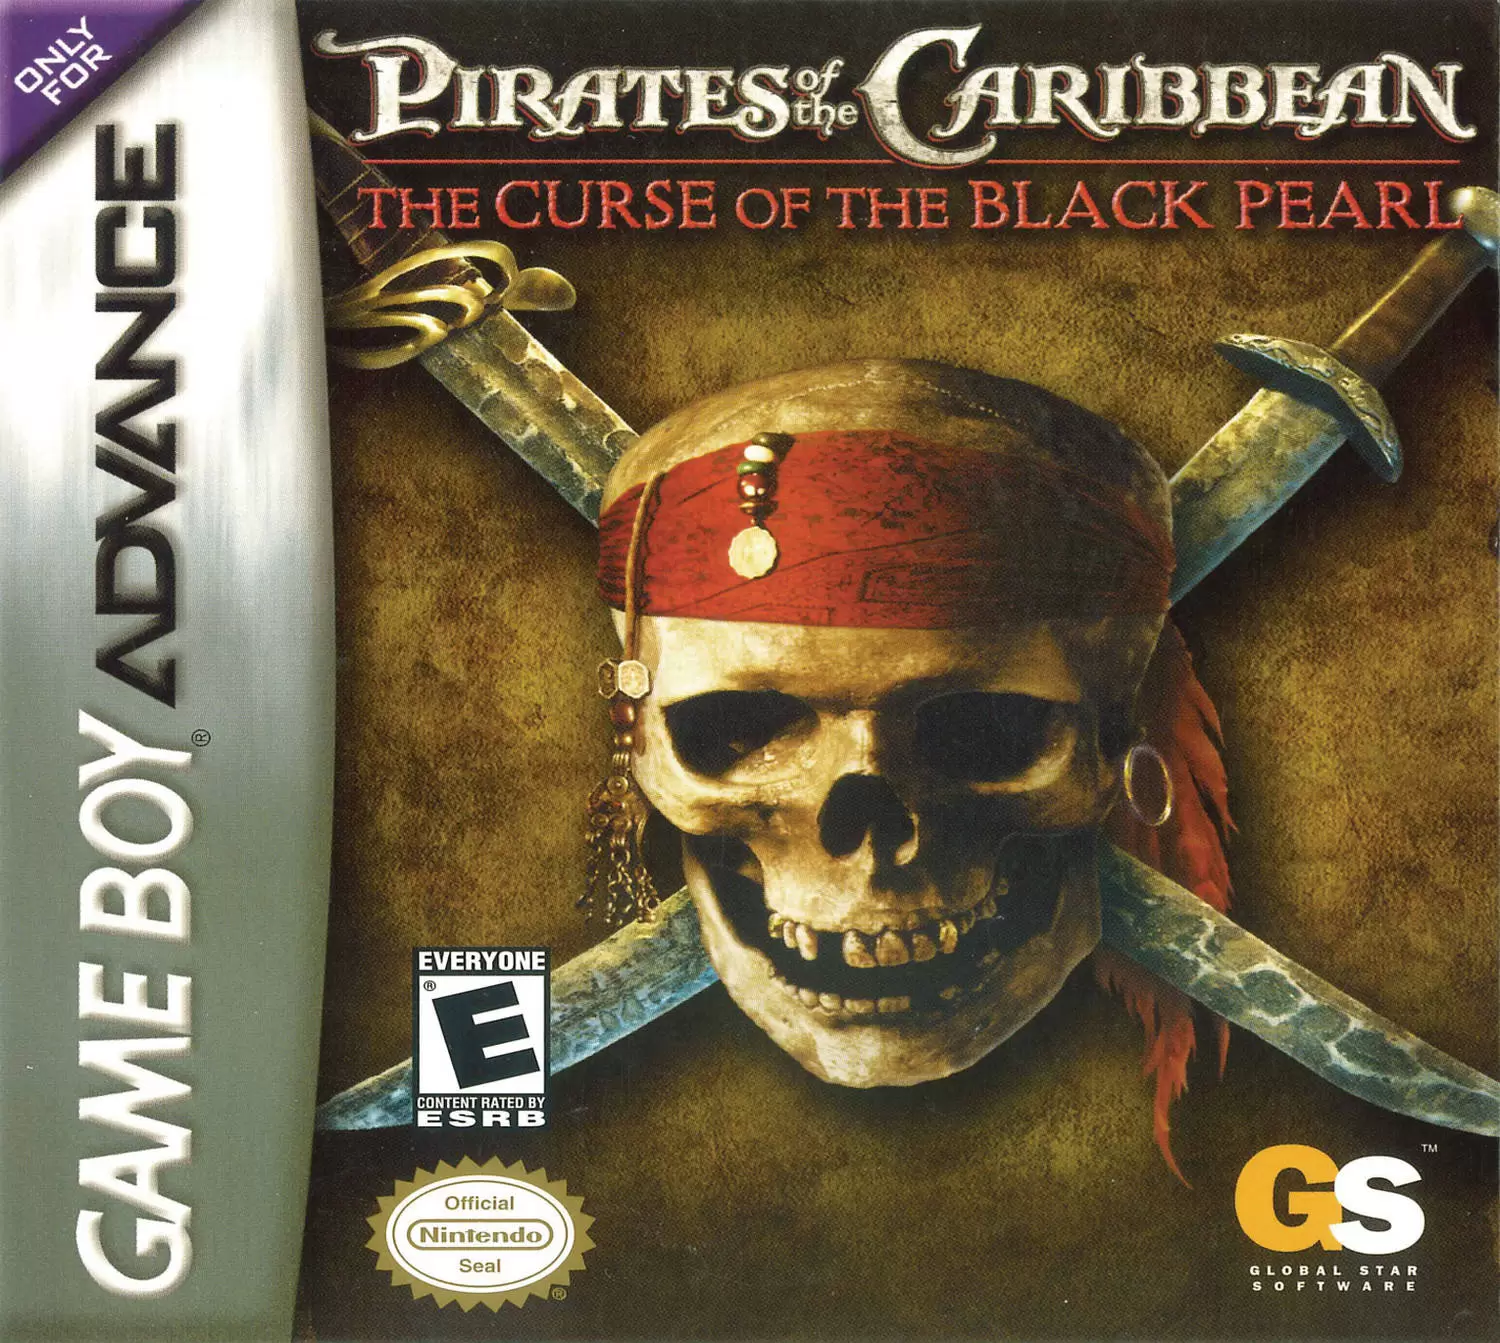 Game Boy Advance Games - Pirates of the Caribbean: The Curse of the Black Pearl